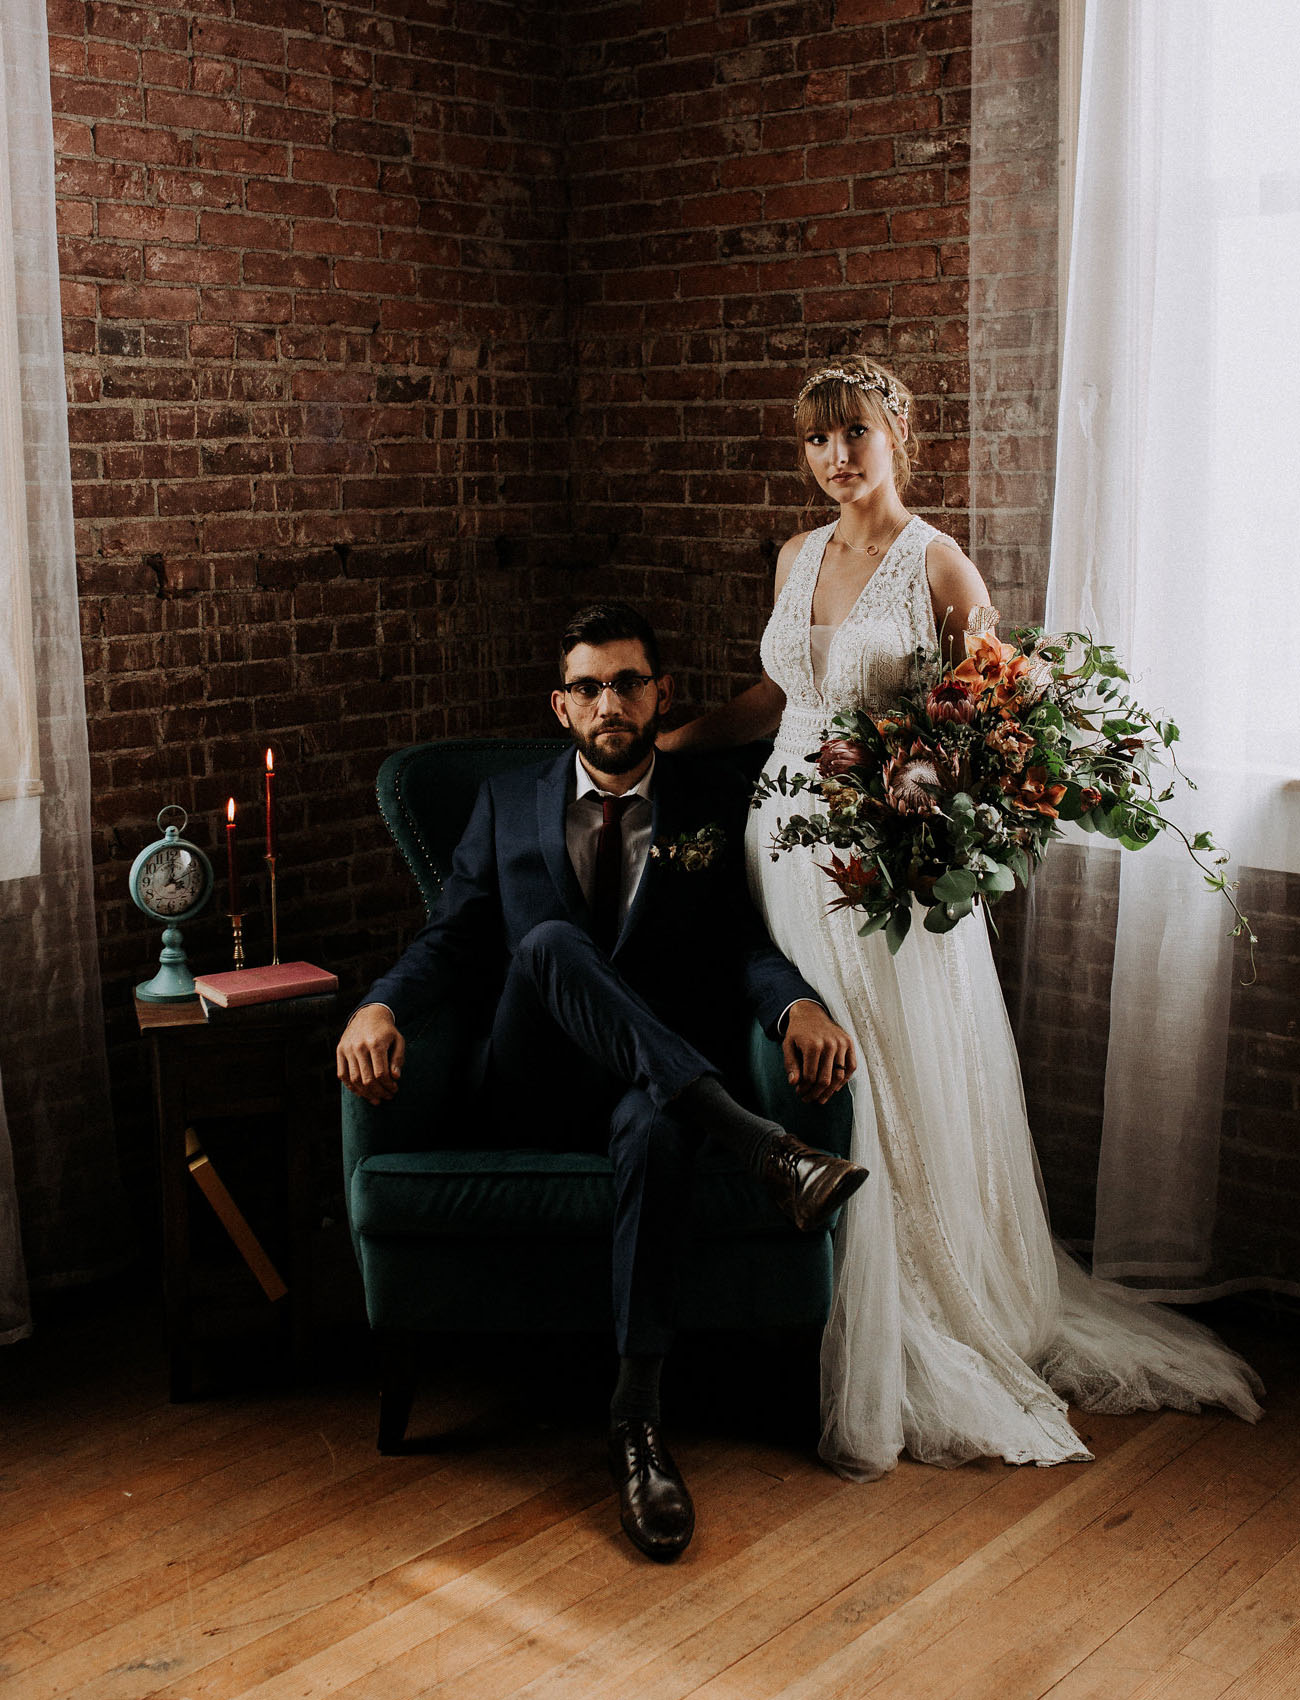 This Bride Surprised the Groom When a Styled Shoot Turned Into an Elopement!